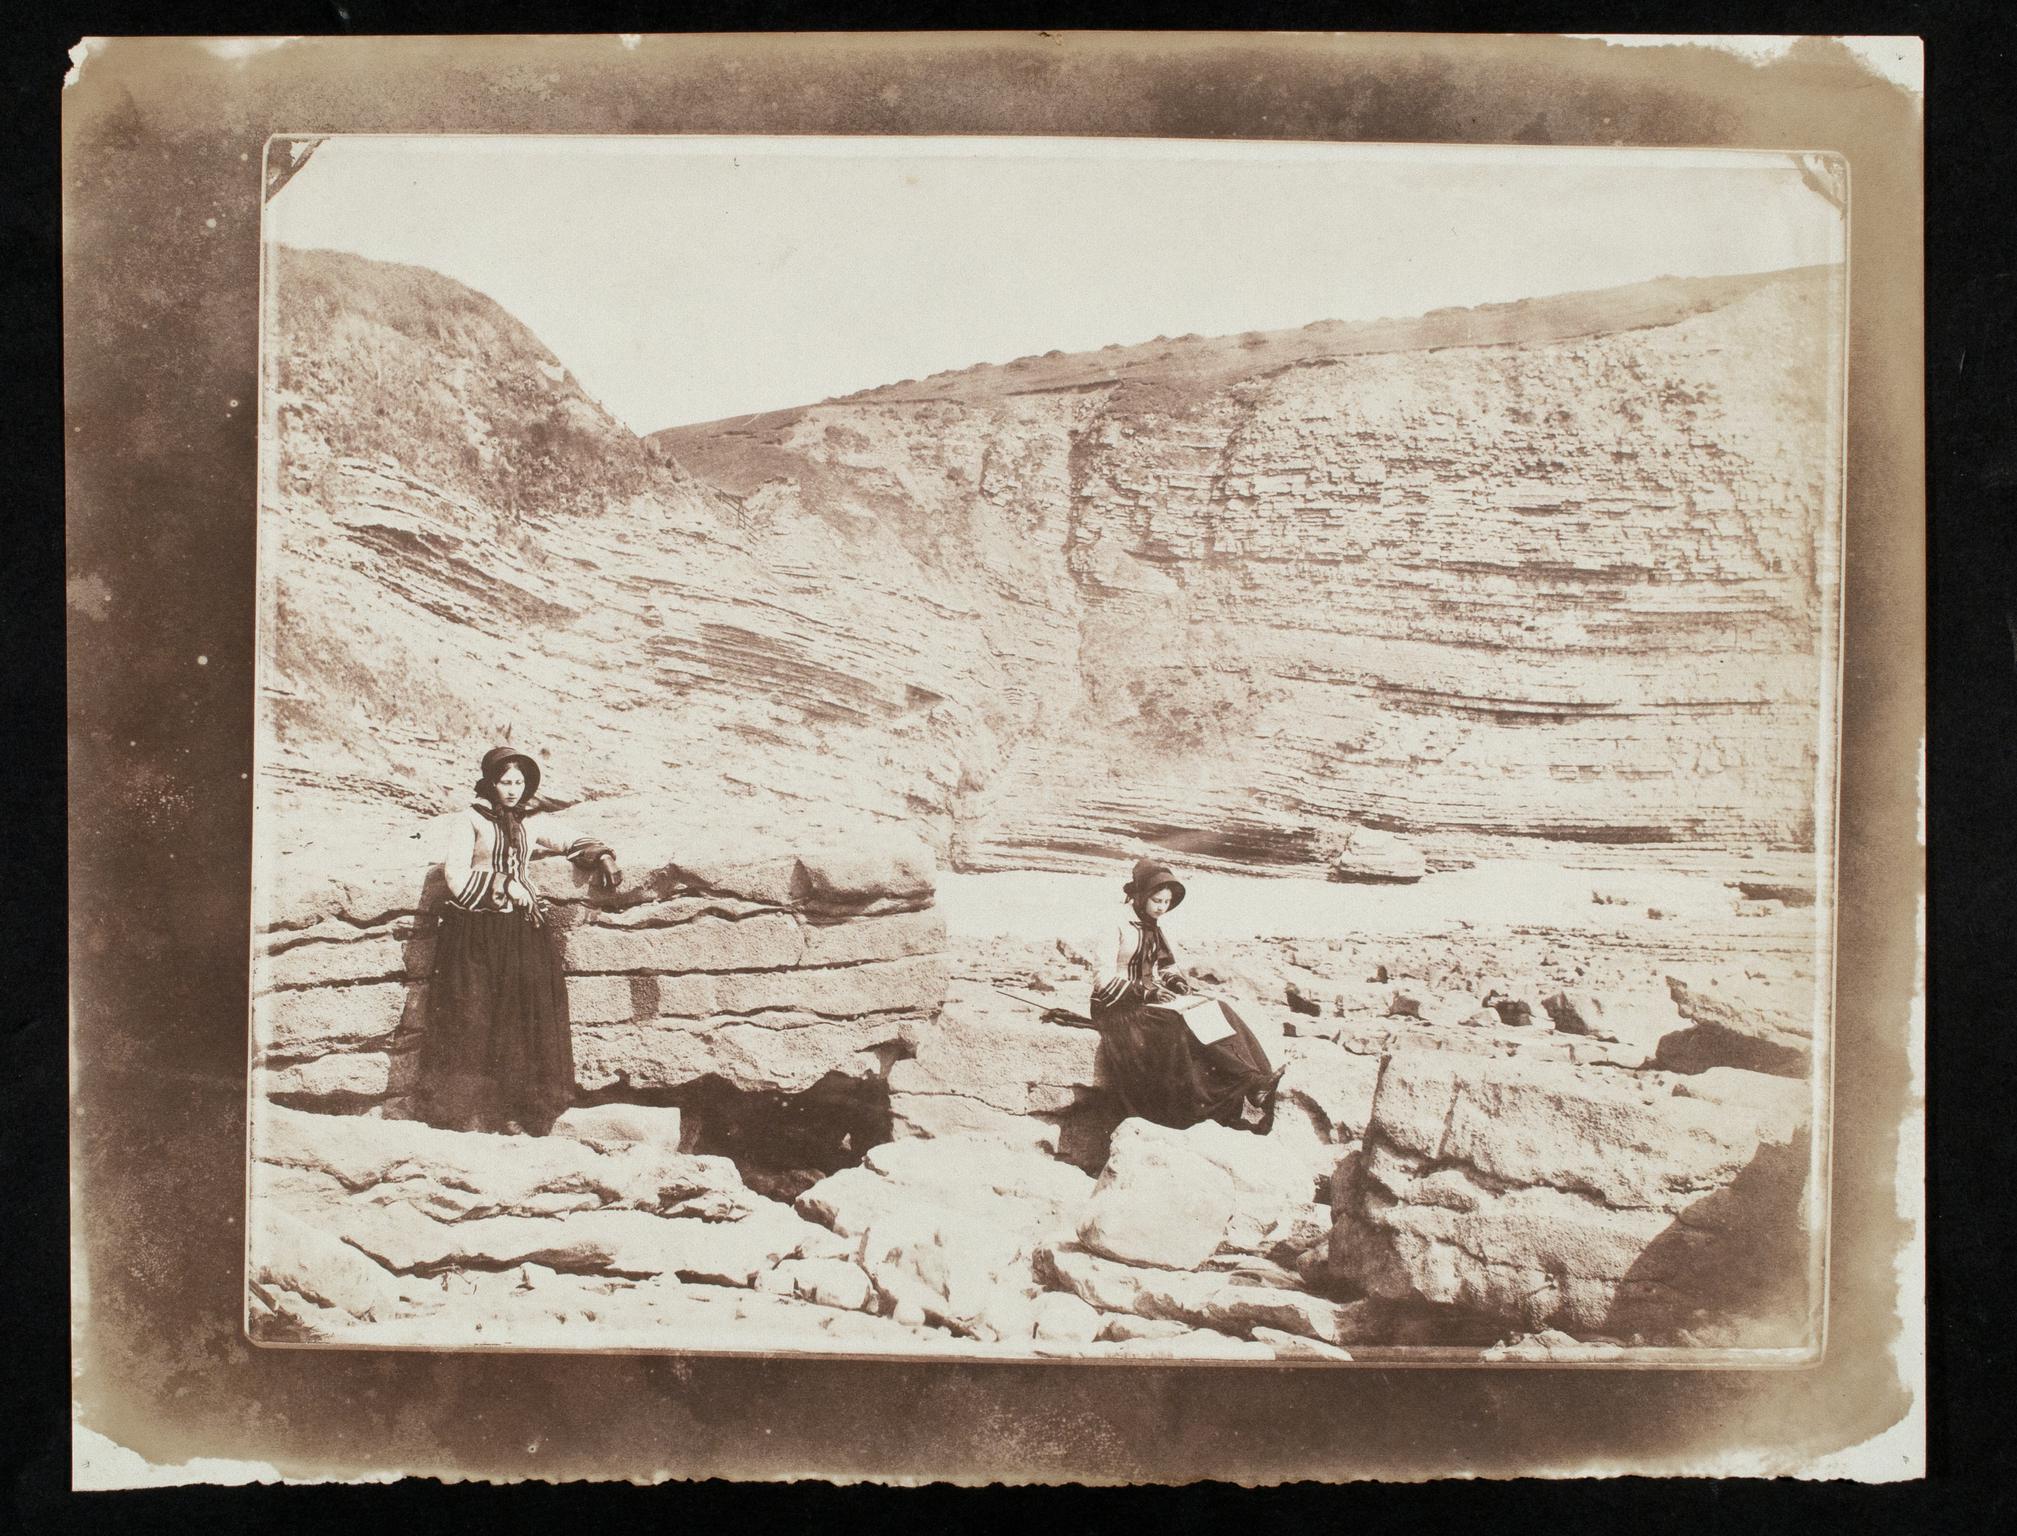 Emma and Thereza Llewelyn, photograph